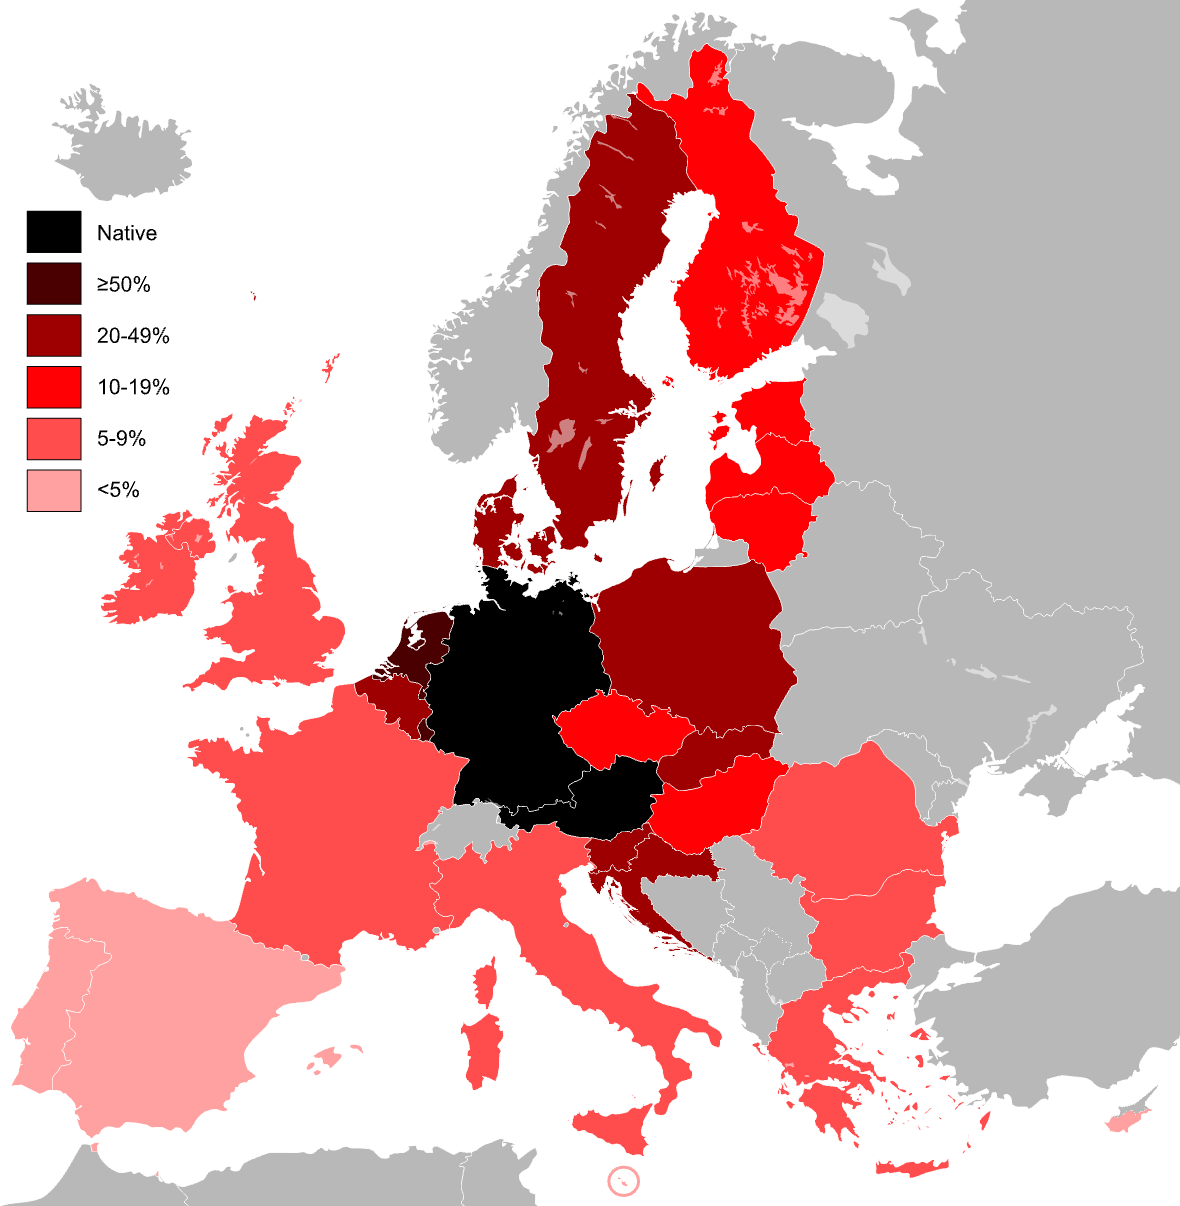 Knowledge of Standard German within the states of the European Union.